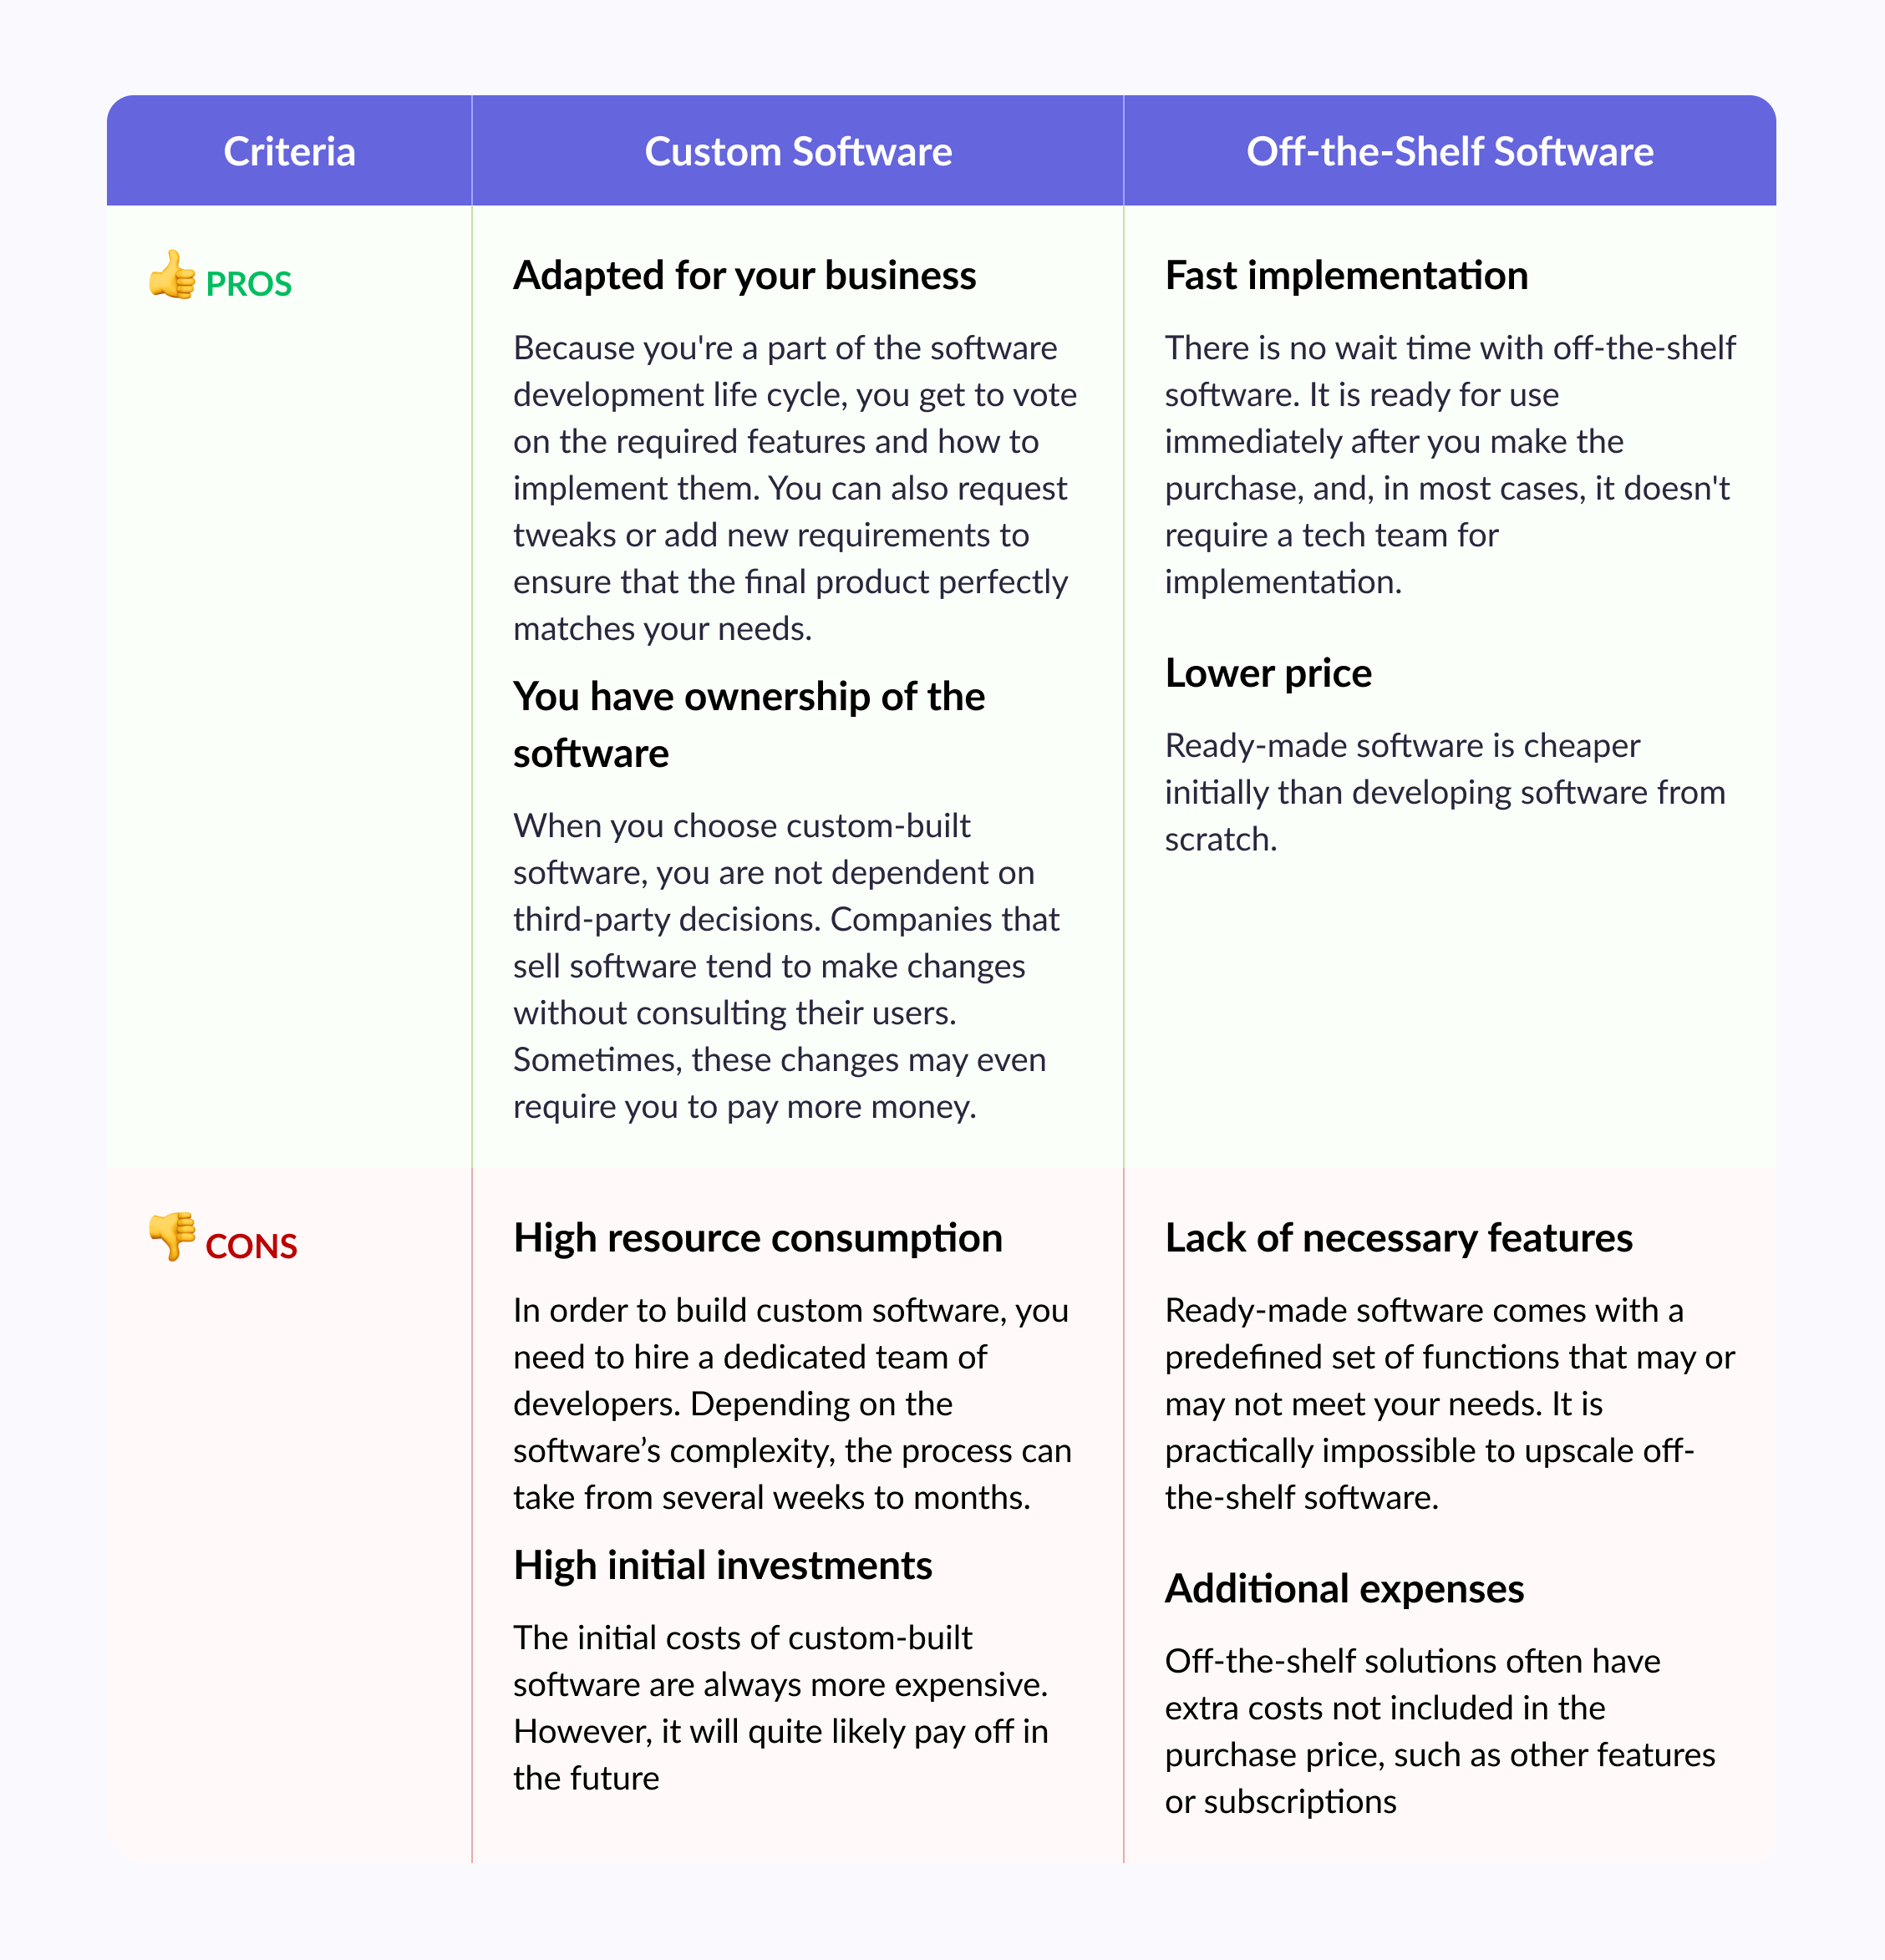 Comparison of pros and cons of custom software and off-the-shelf software